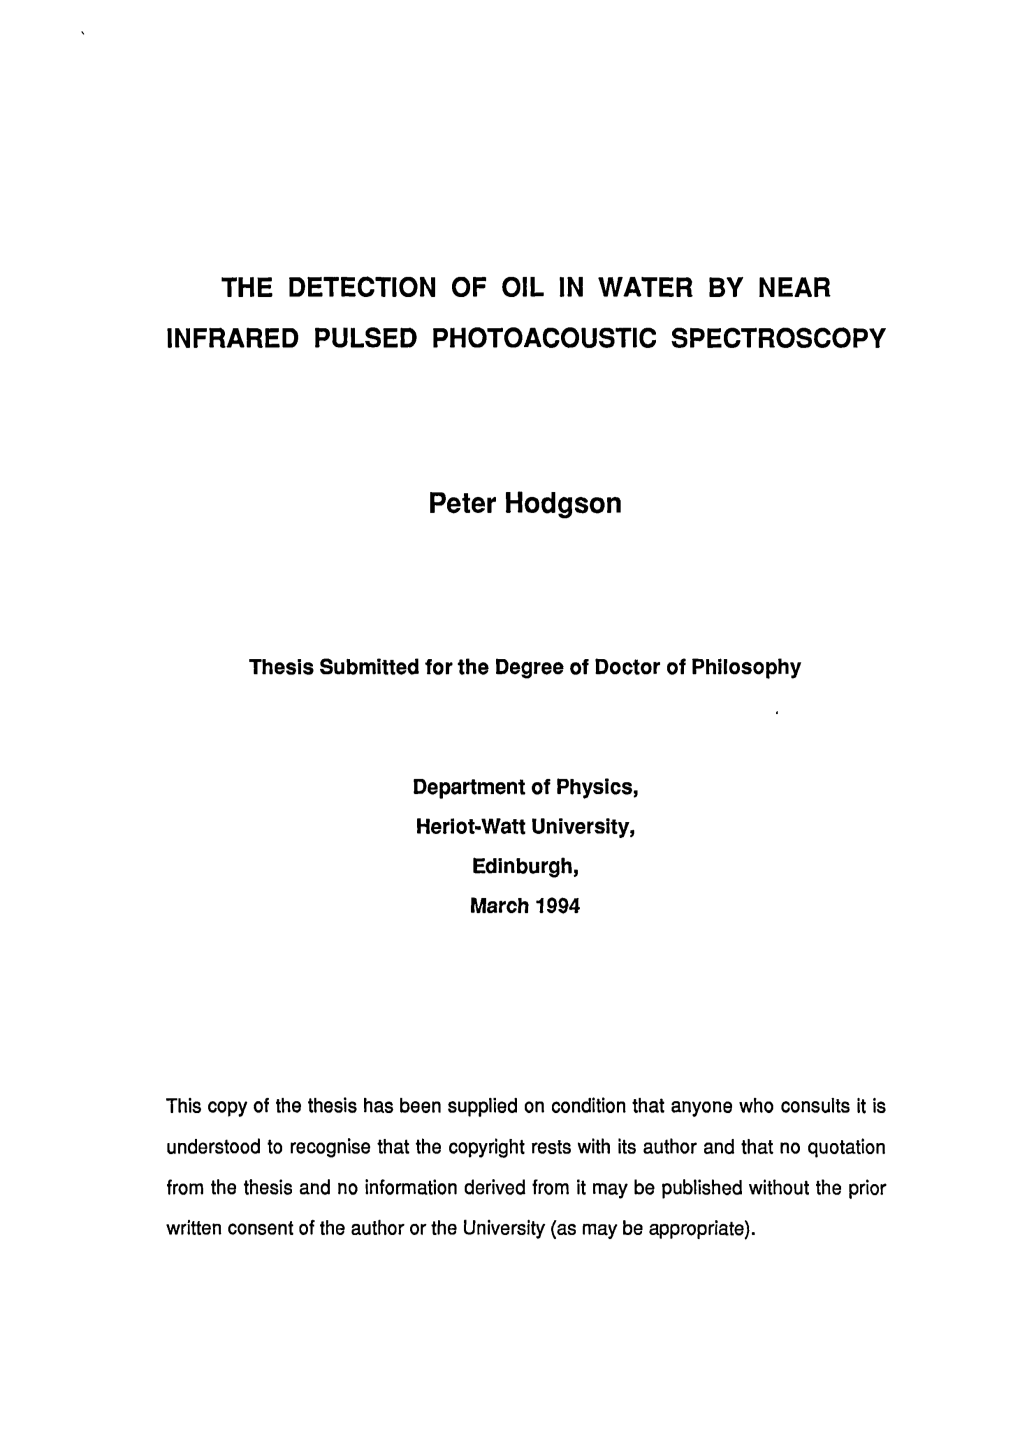 The Detection of Oil in Water by Near Infrared Pulsed Photoacoustic Spectroscopy